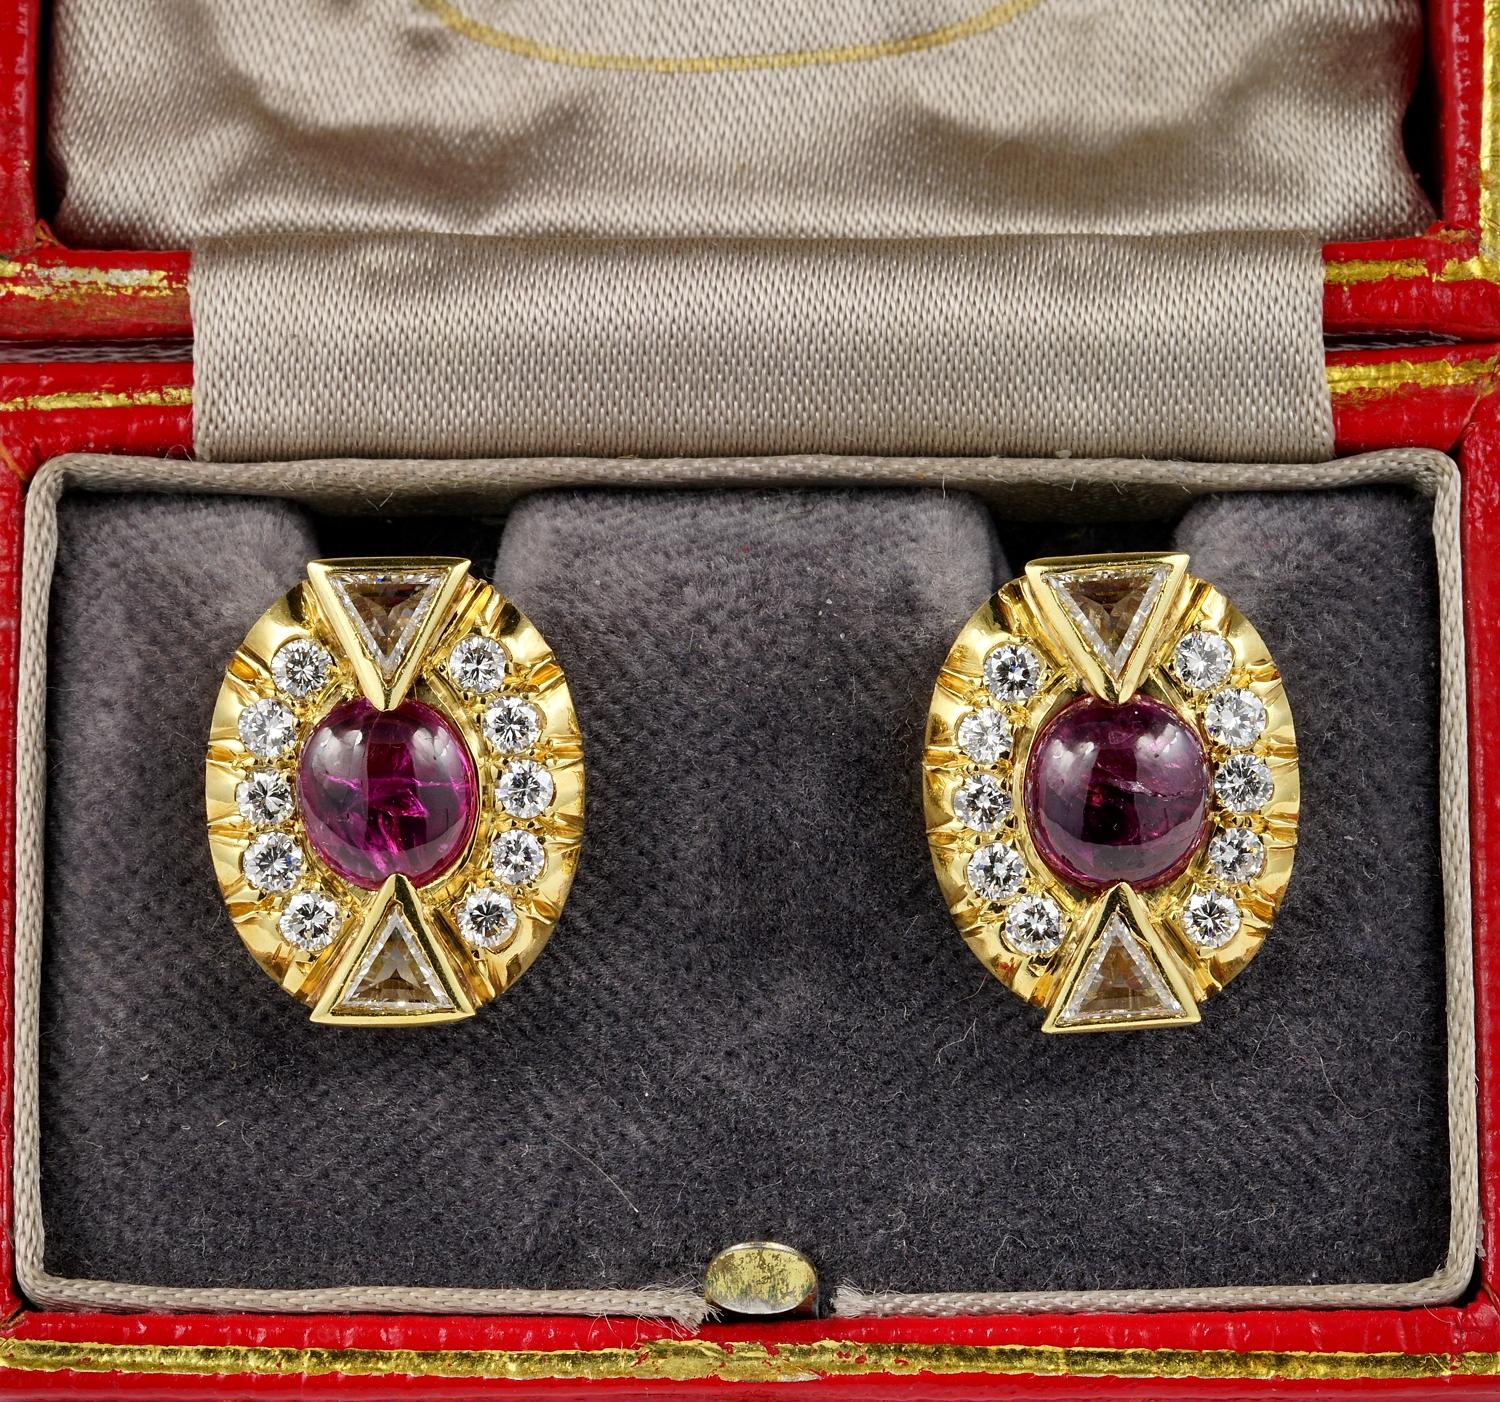 Striking Art Deco Ruby and Diamond featuring charming geometric design and earth mined gemstones combining drama and style in equal parts.
1935 ca European origin.
Hand crafted as individual jewel of solid 18 KT gold not marked.
Starring two natural